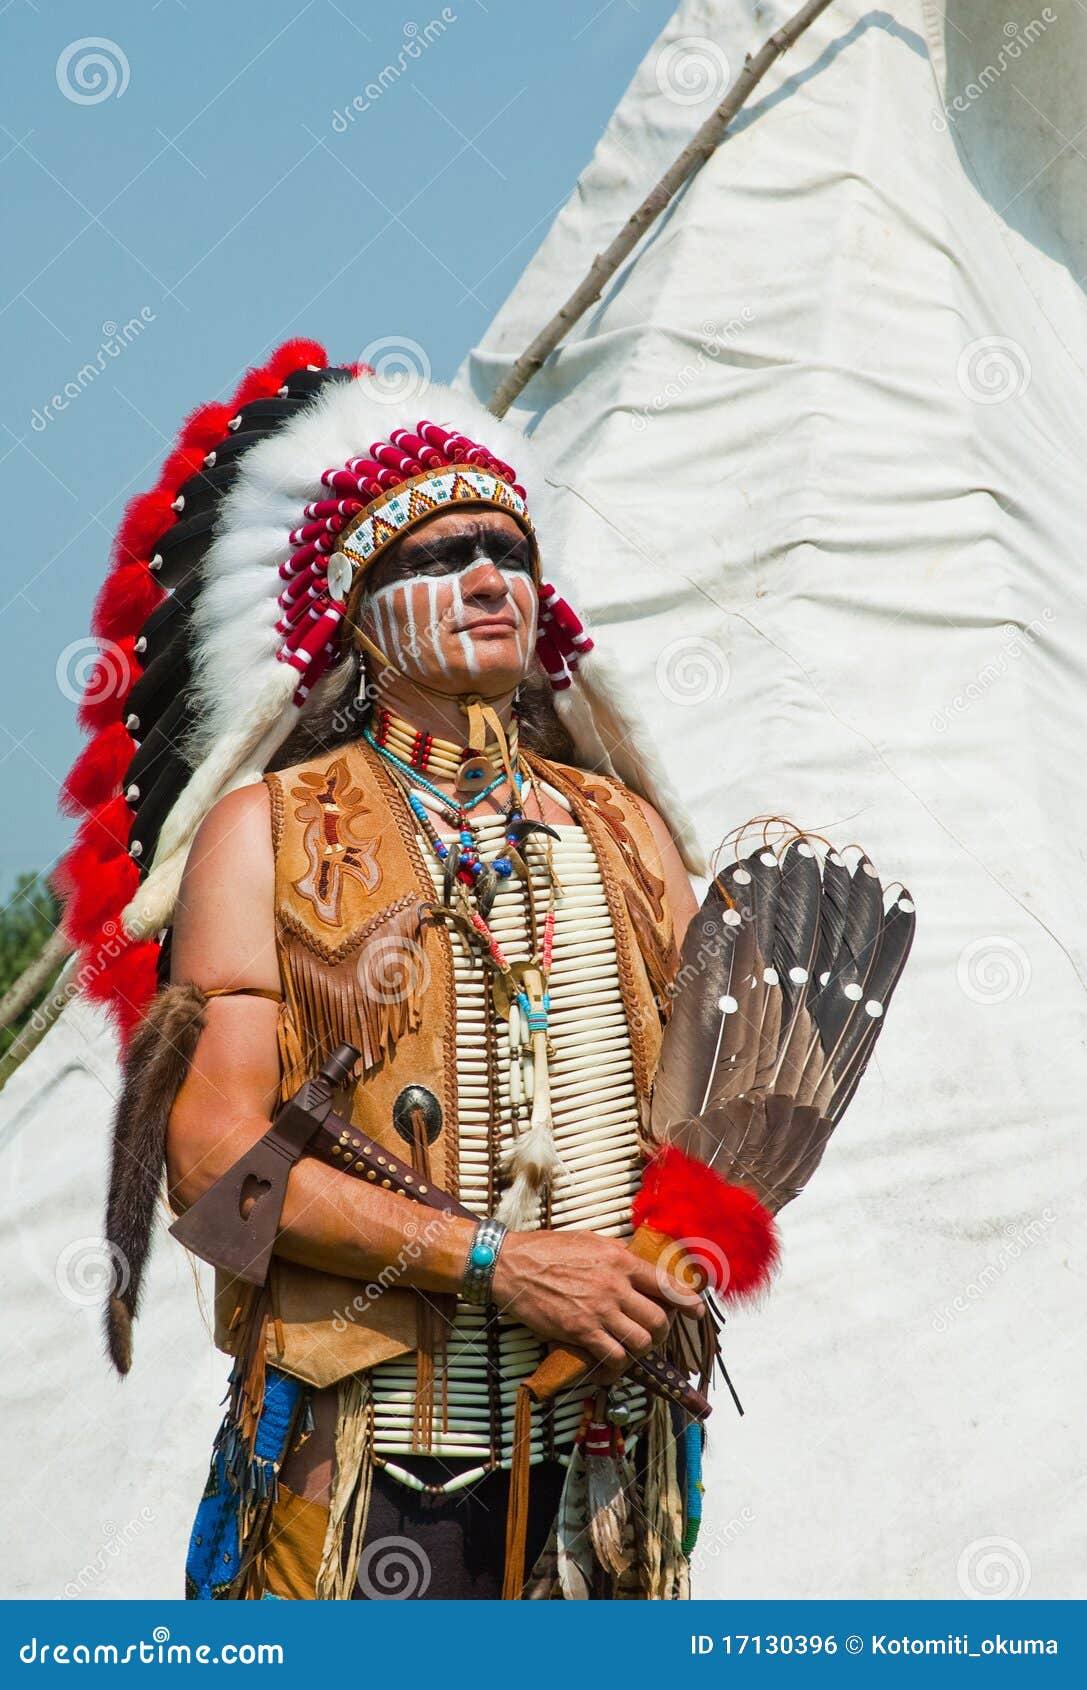 North American Indian Royalty Free Stock Image - Image: 17130396